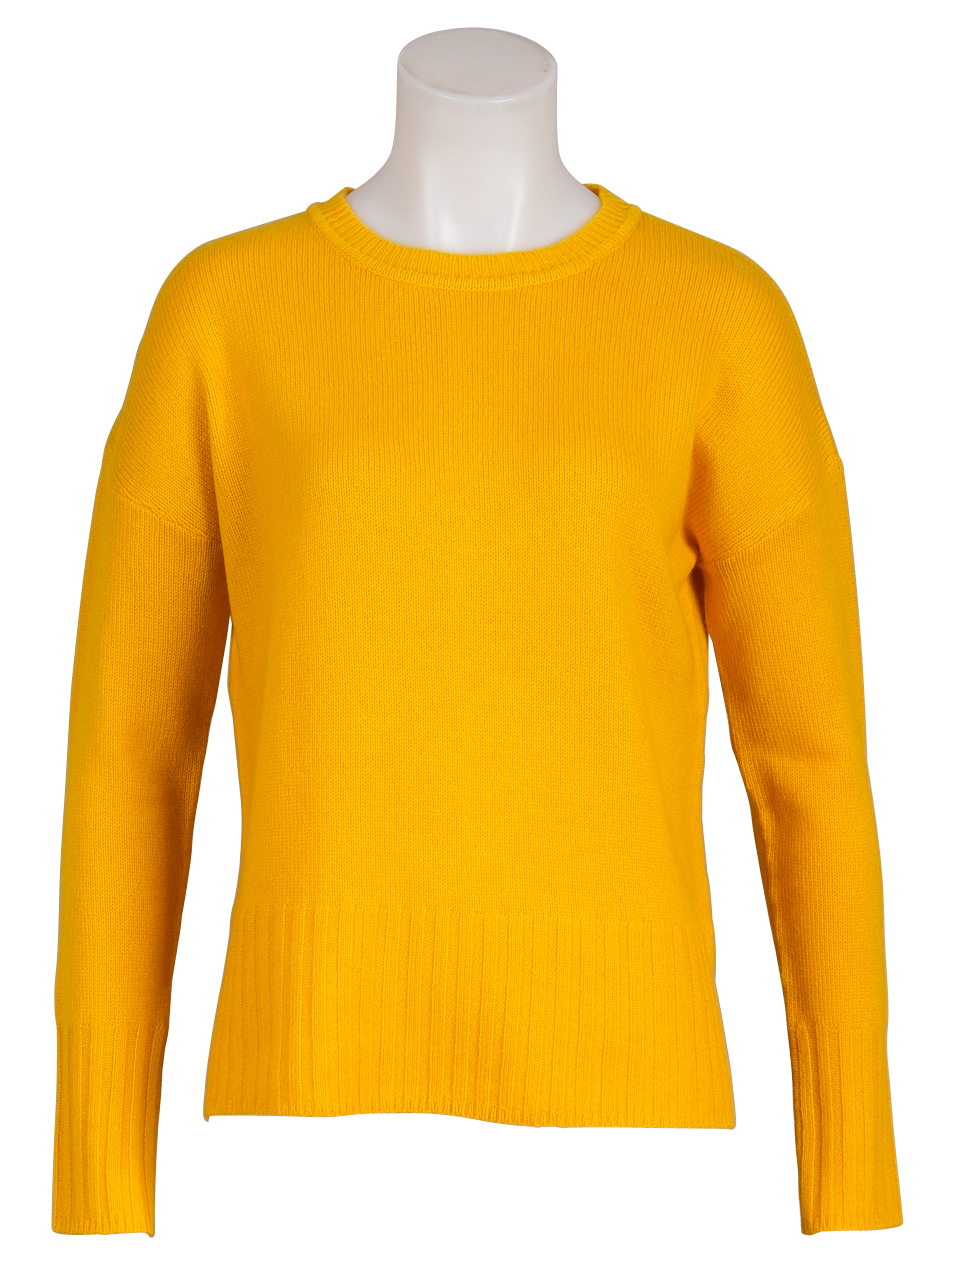 TheHolyGoat - Cashmere-Pullover -AVA- Gelb